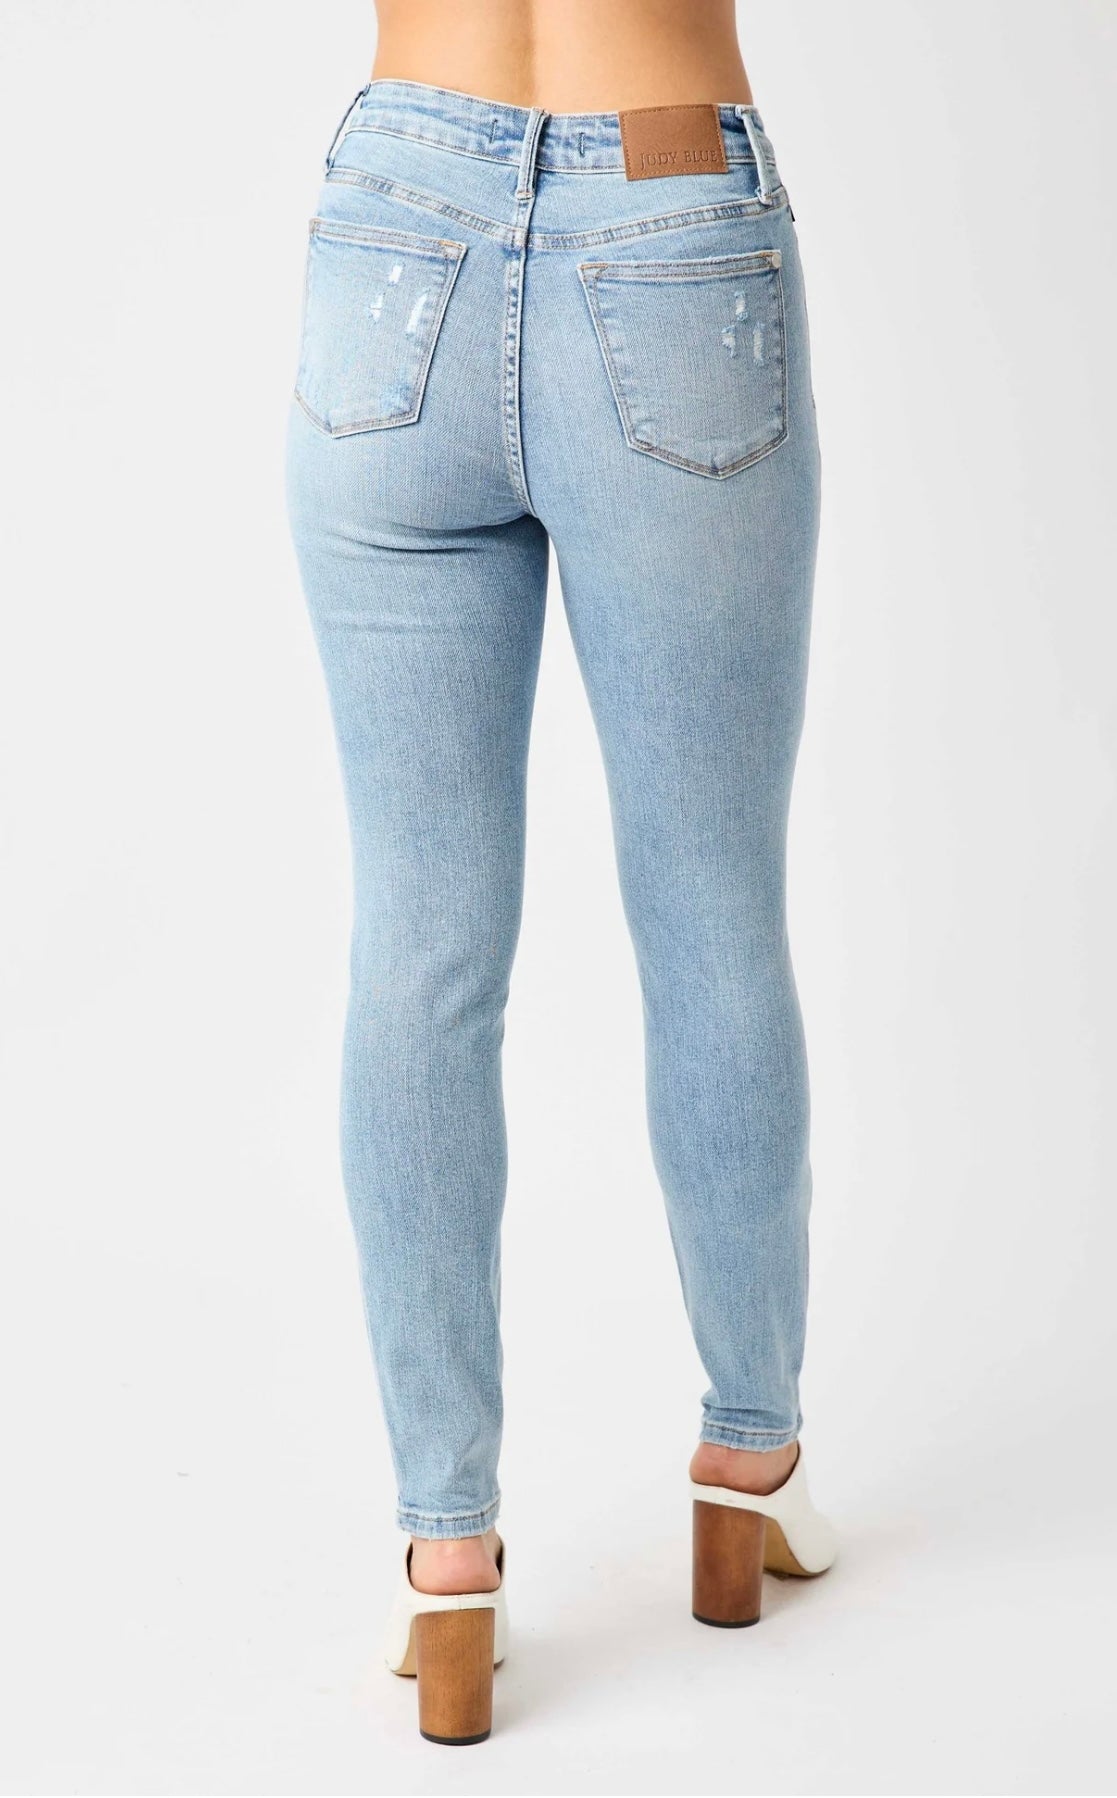 Judy Blue Have Your Way Tummy Control Jeans-Emerald Creek-Shop Anchored Bliss Women's Boutique Clothing Store